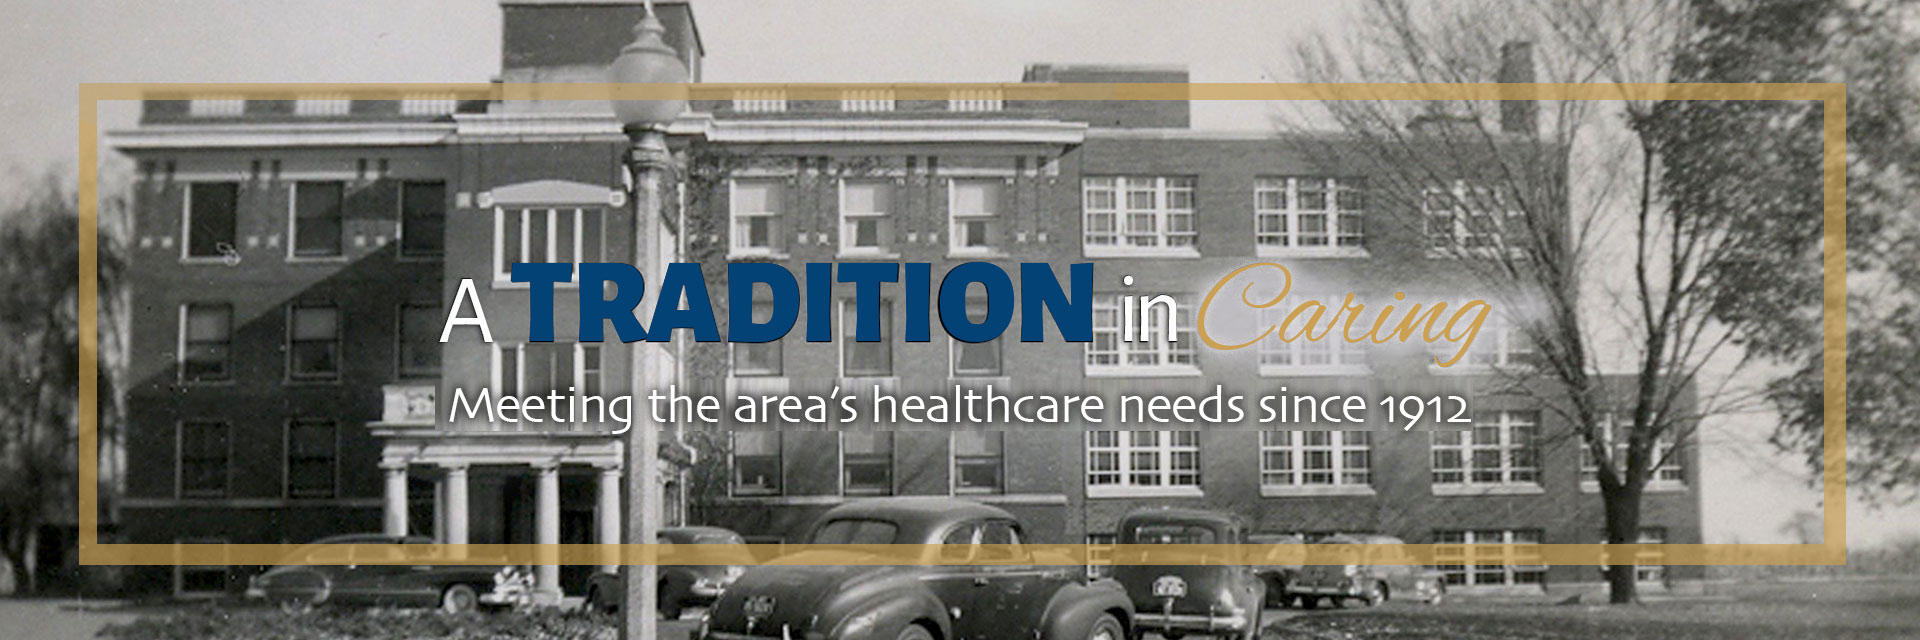 Banner picture of the old Washington County Hospital. There is cars parked outside of the Hospital. Banner says:

A TRADITION in Caring 
Meeting the area's healthcare needs since 1912.